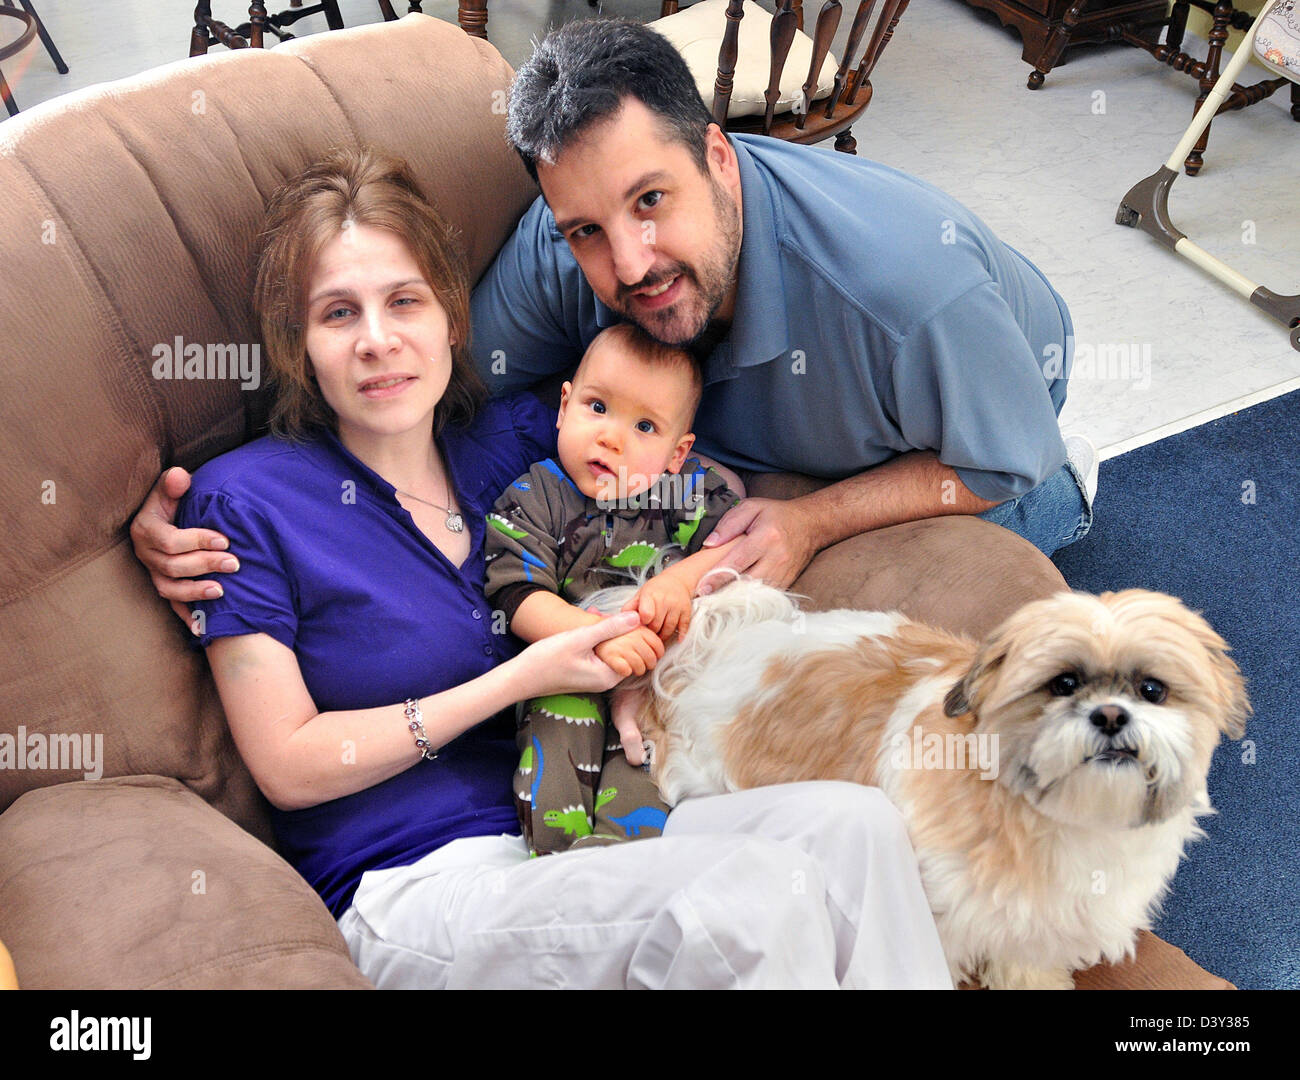 A woman with husband and child, who has medical seizure difficulties Stock Photo